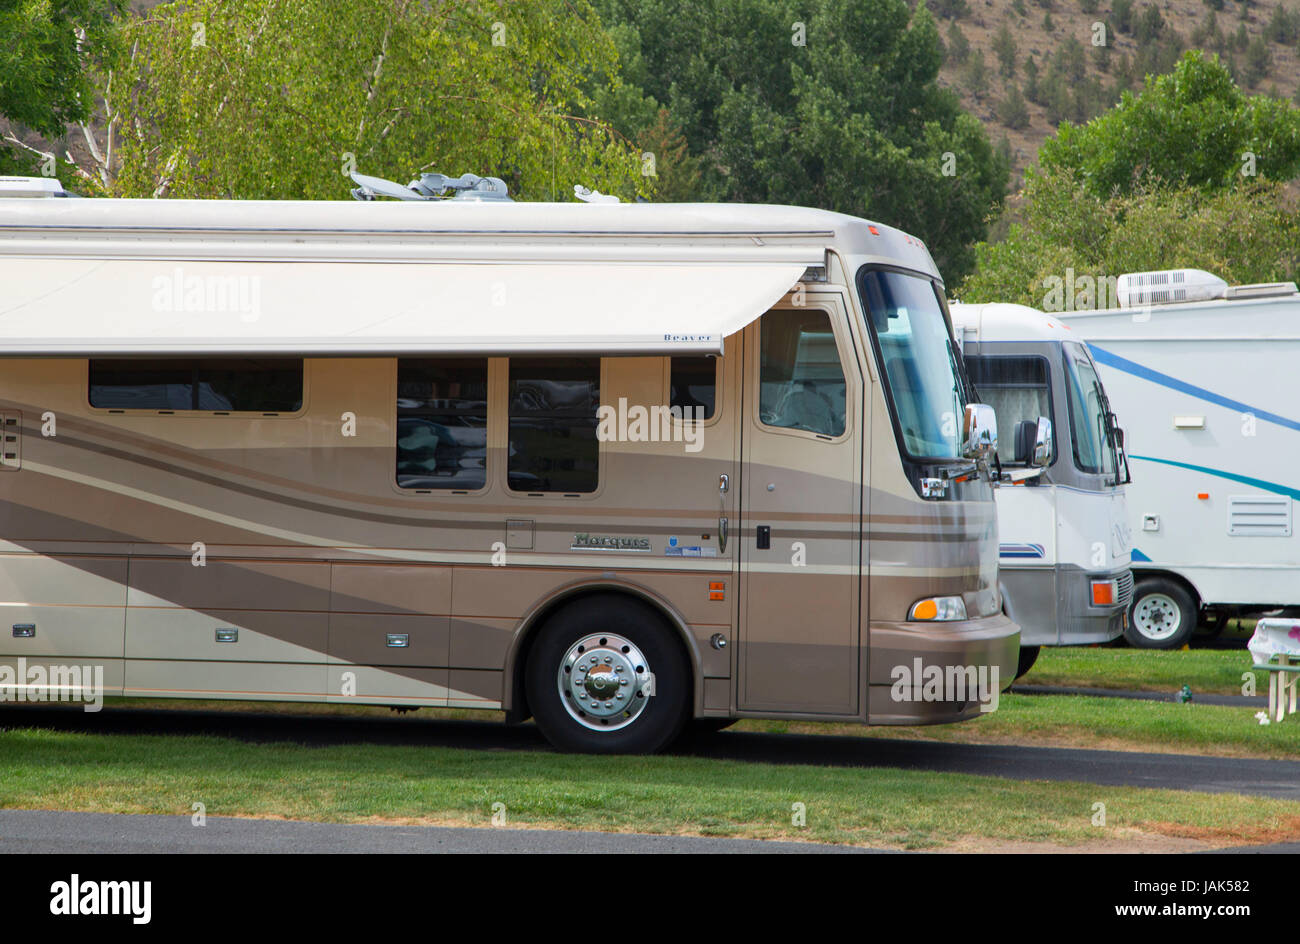 Motorhome in campground, Crook County Fairgrounds, Prineville, Oregon Stock Photo